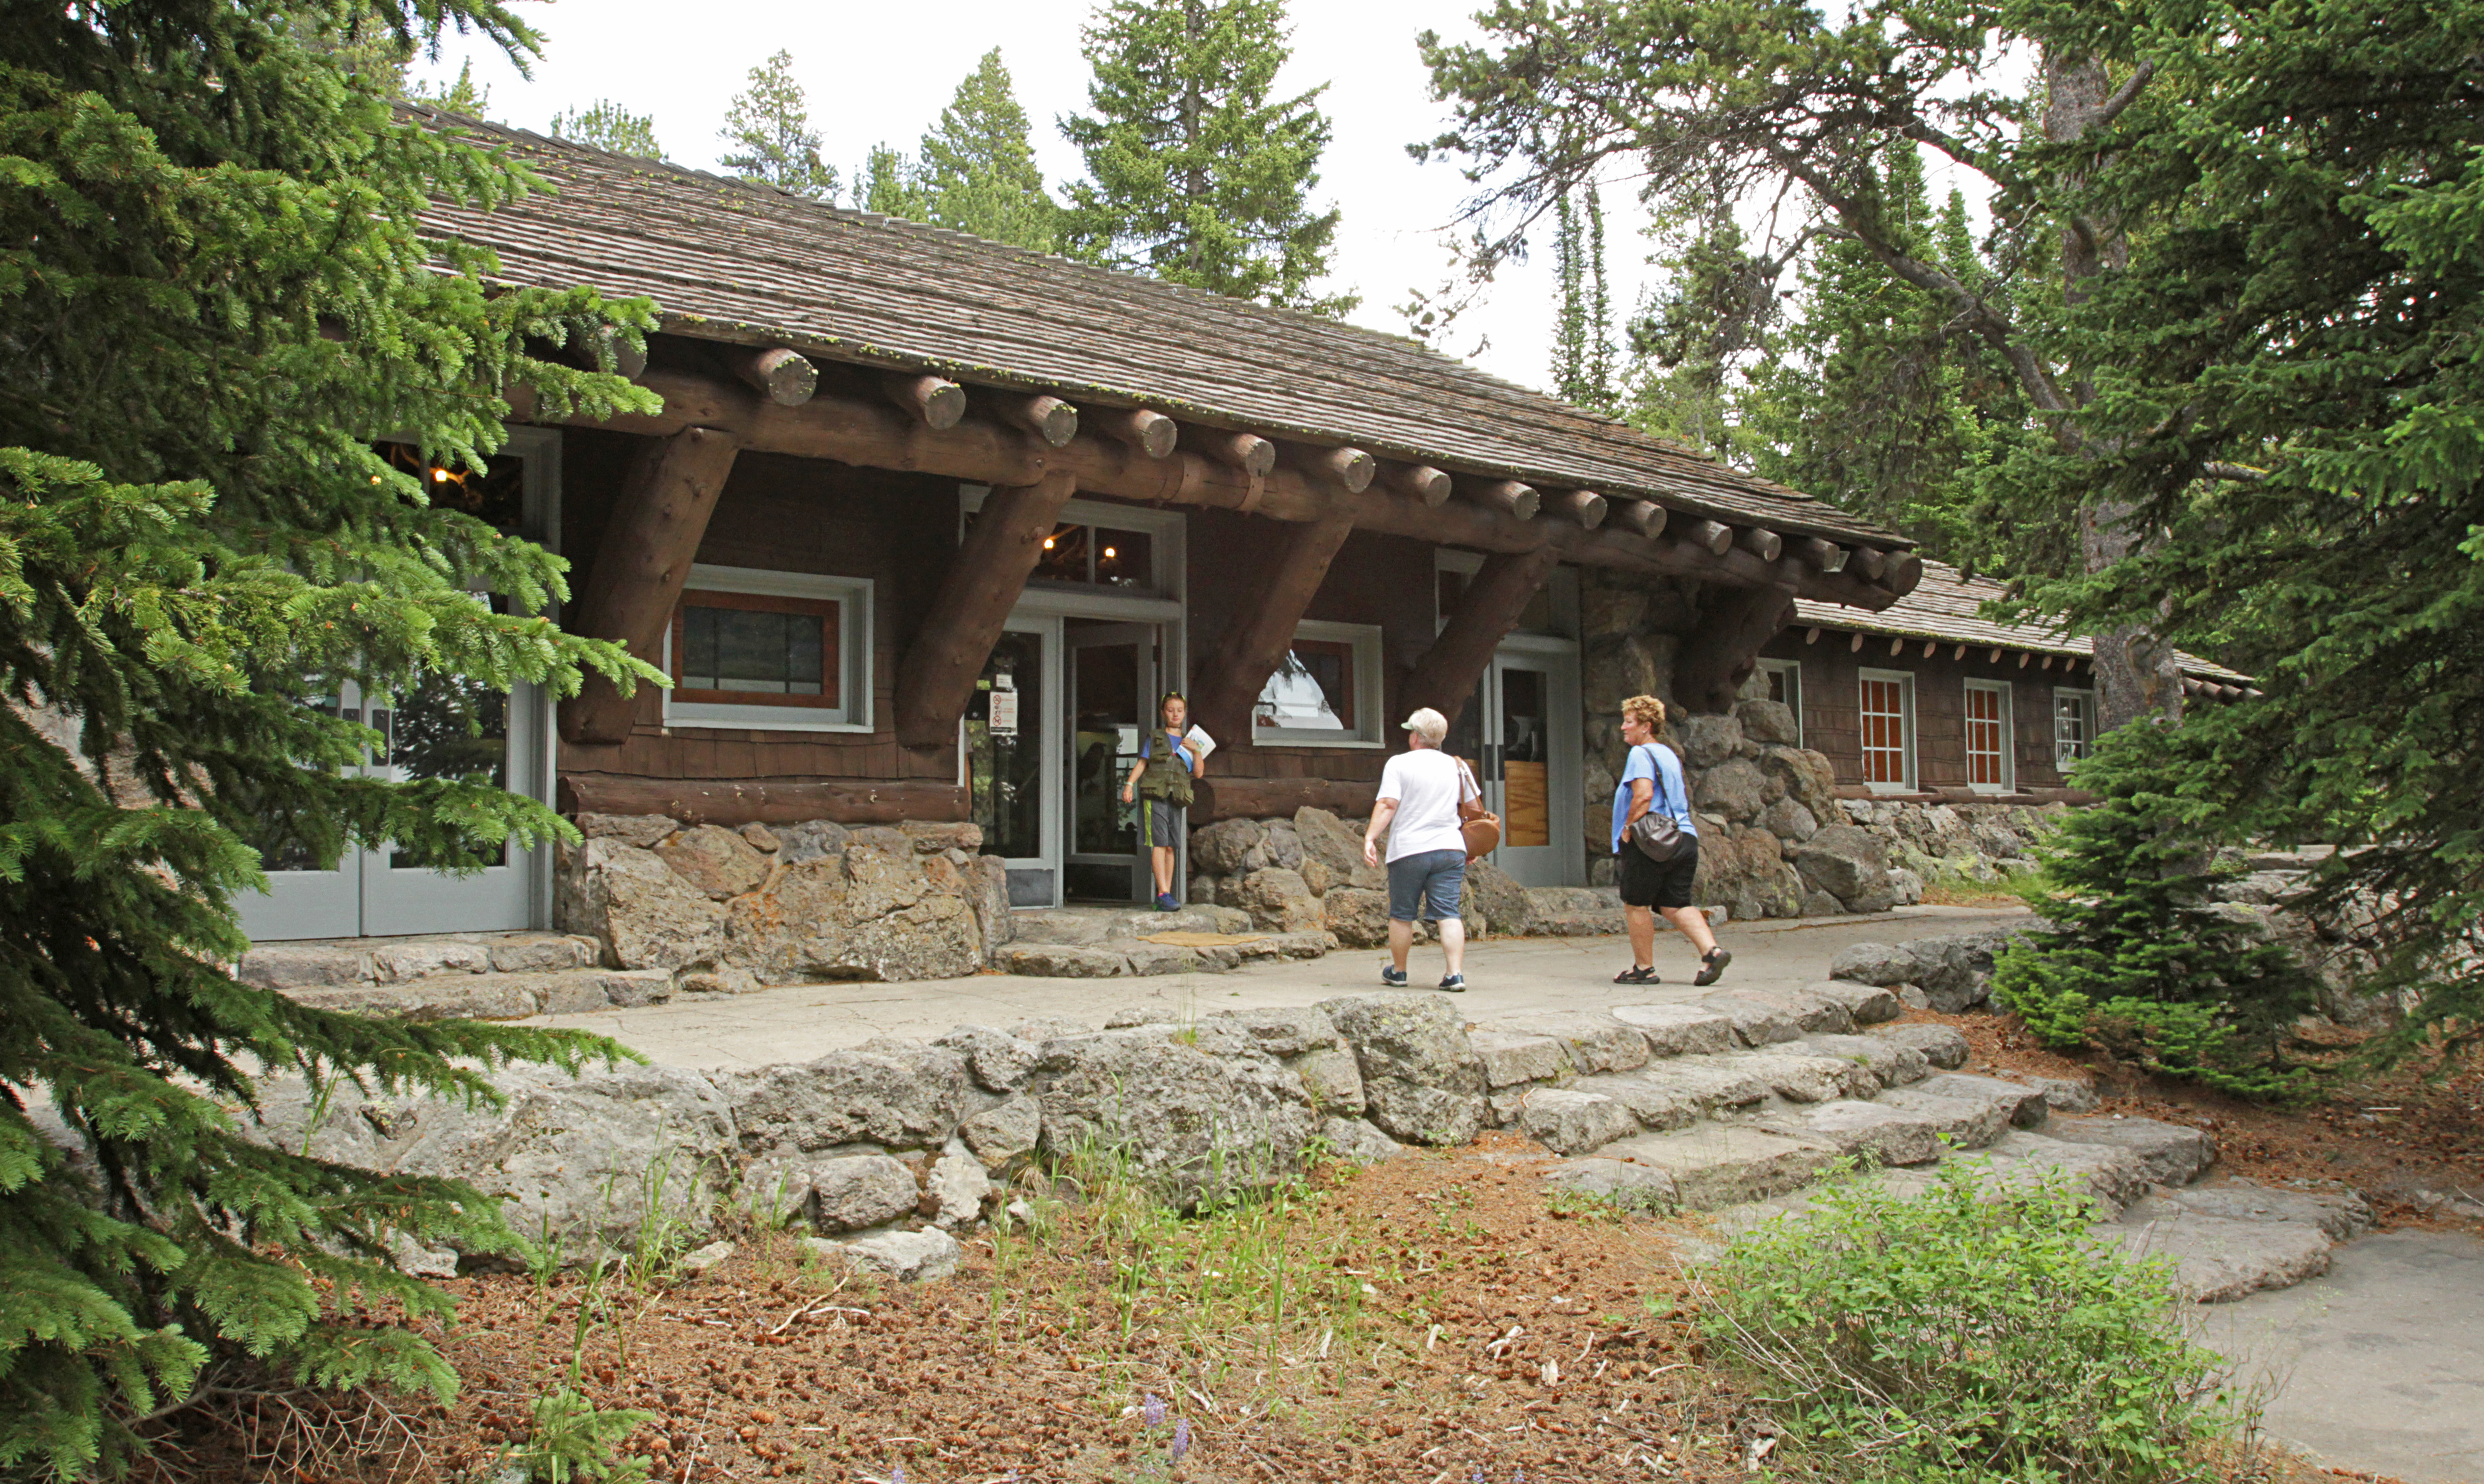 Visitors walk into a rustic, log and stone building.